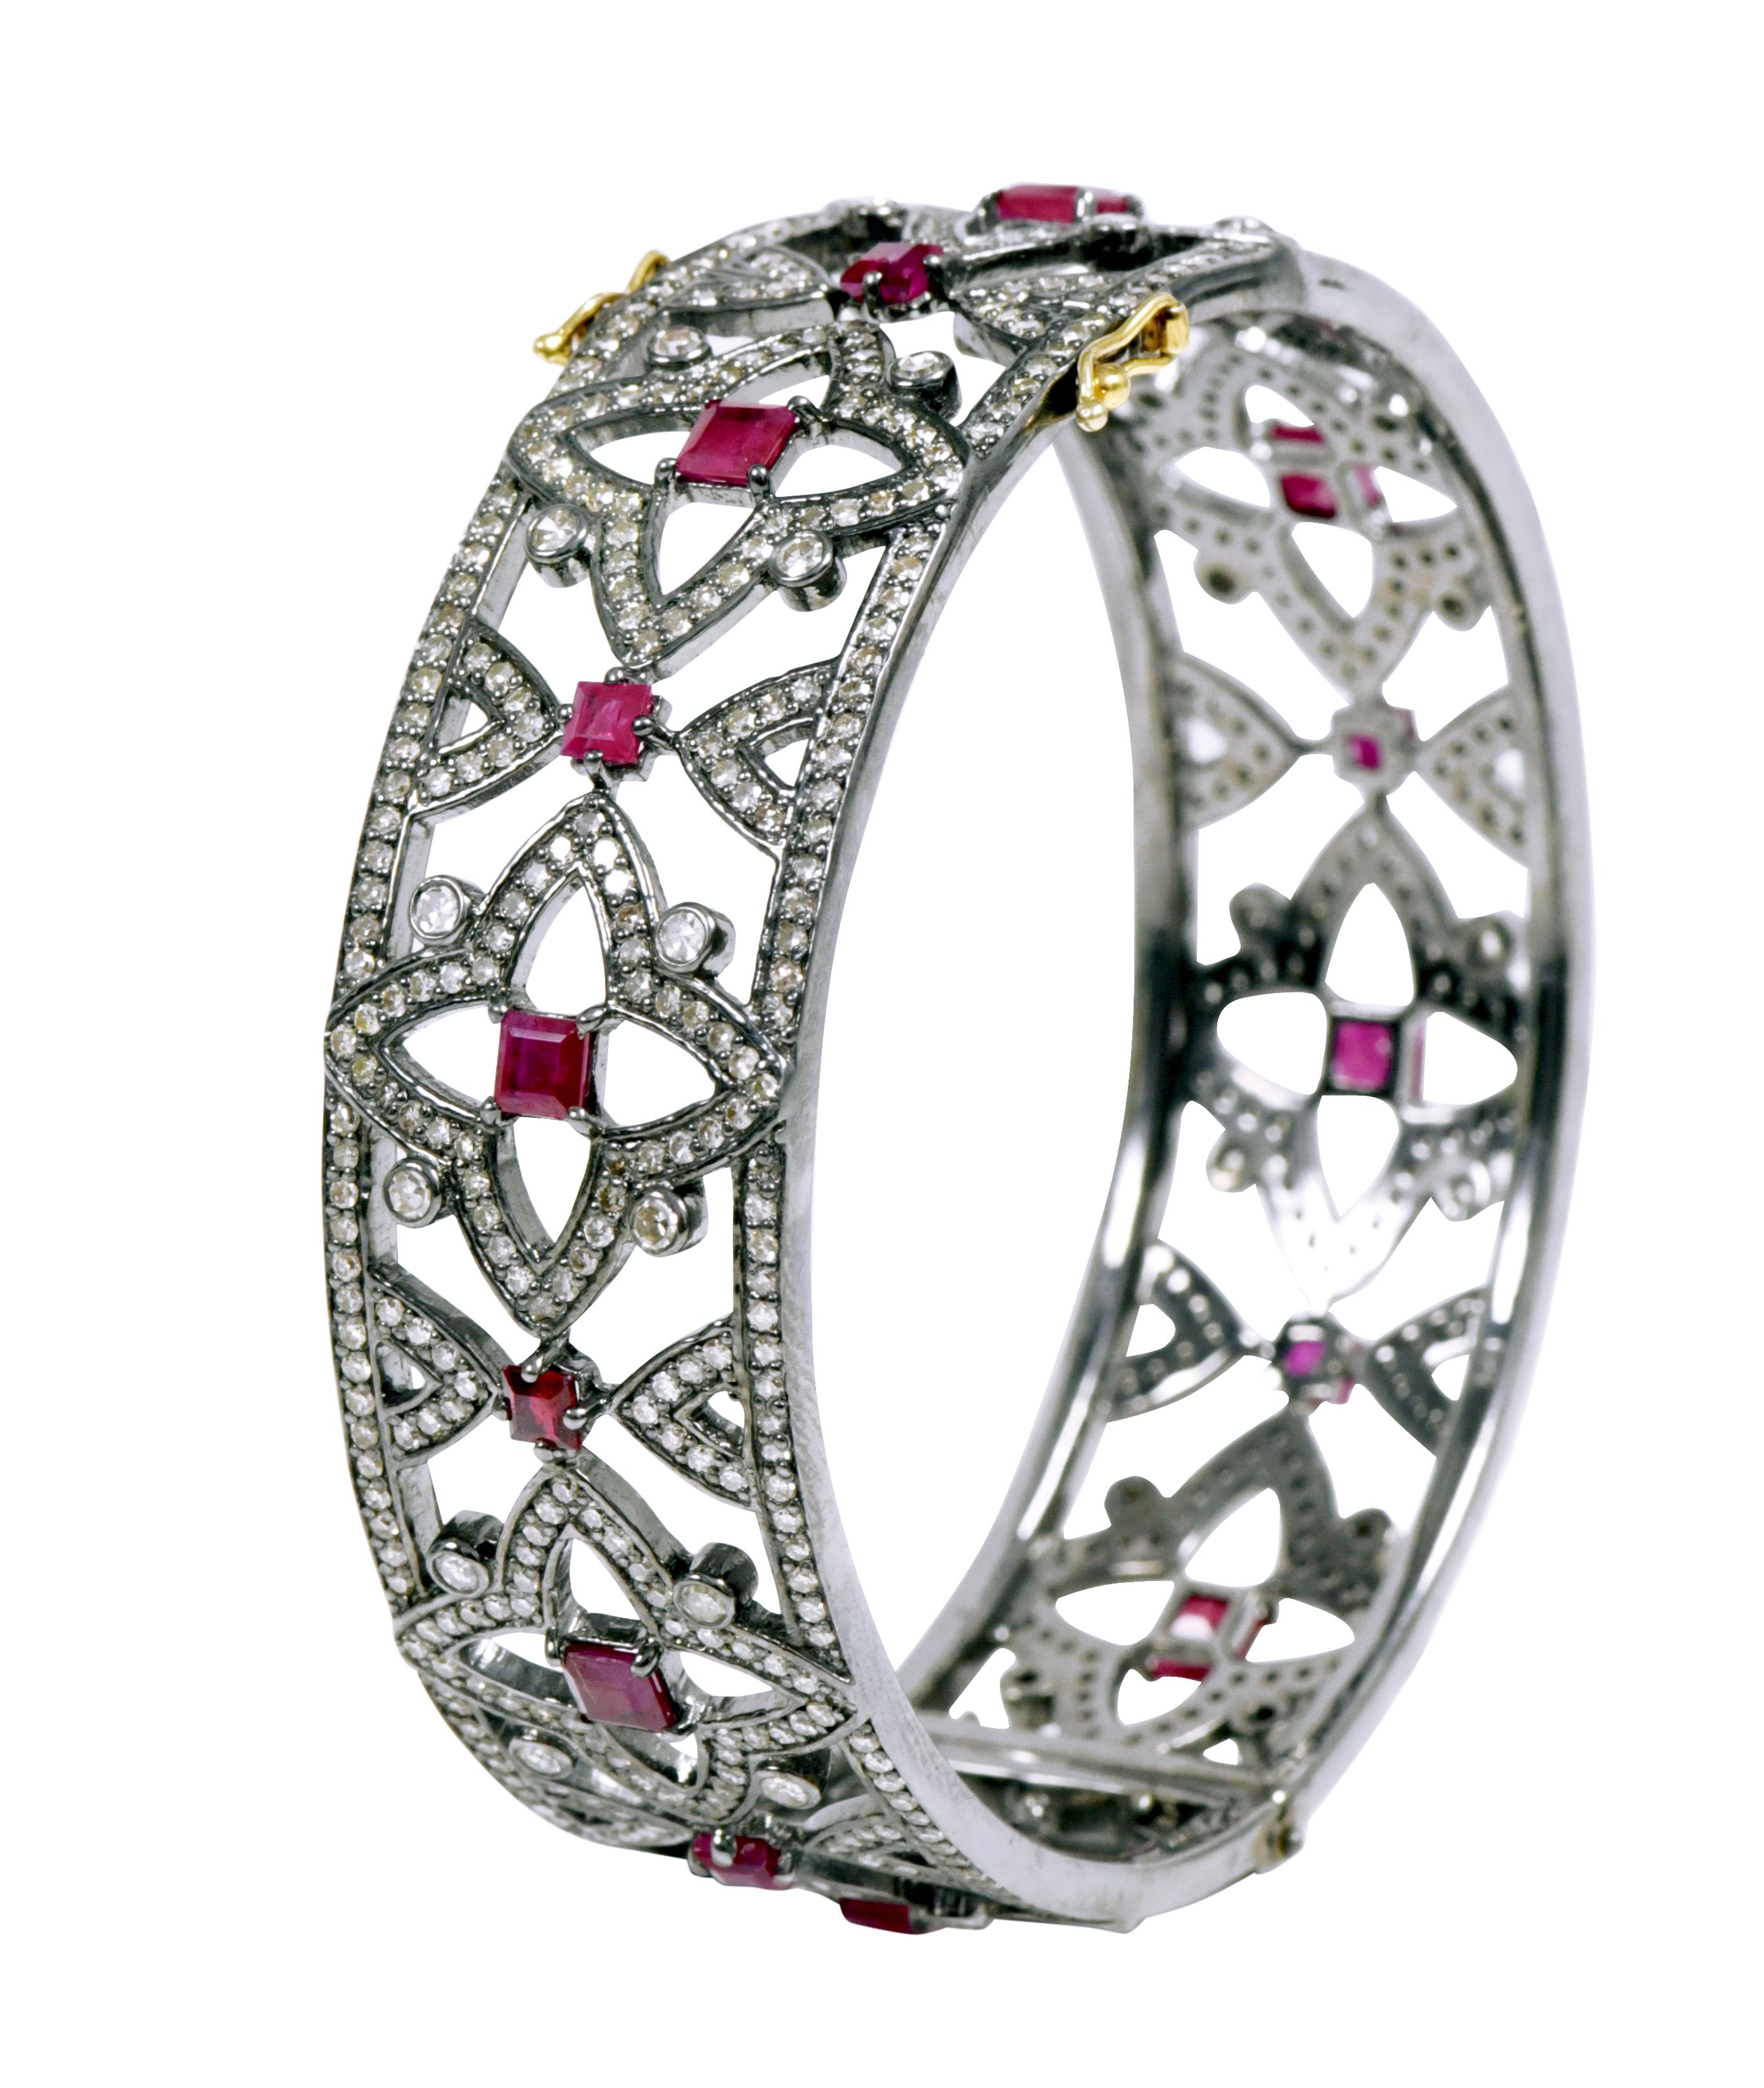 Diamond and Ruby 10.60 Carats Bangle in Victorian Style

Inspired by the Victorian Era, this art-deco style bangle is timelessly elegant. Created by a feat of fine craftsmanship and imagination, this magnificent design features a star shape